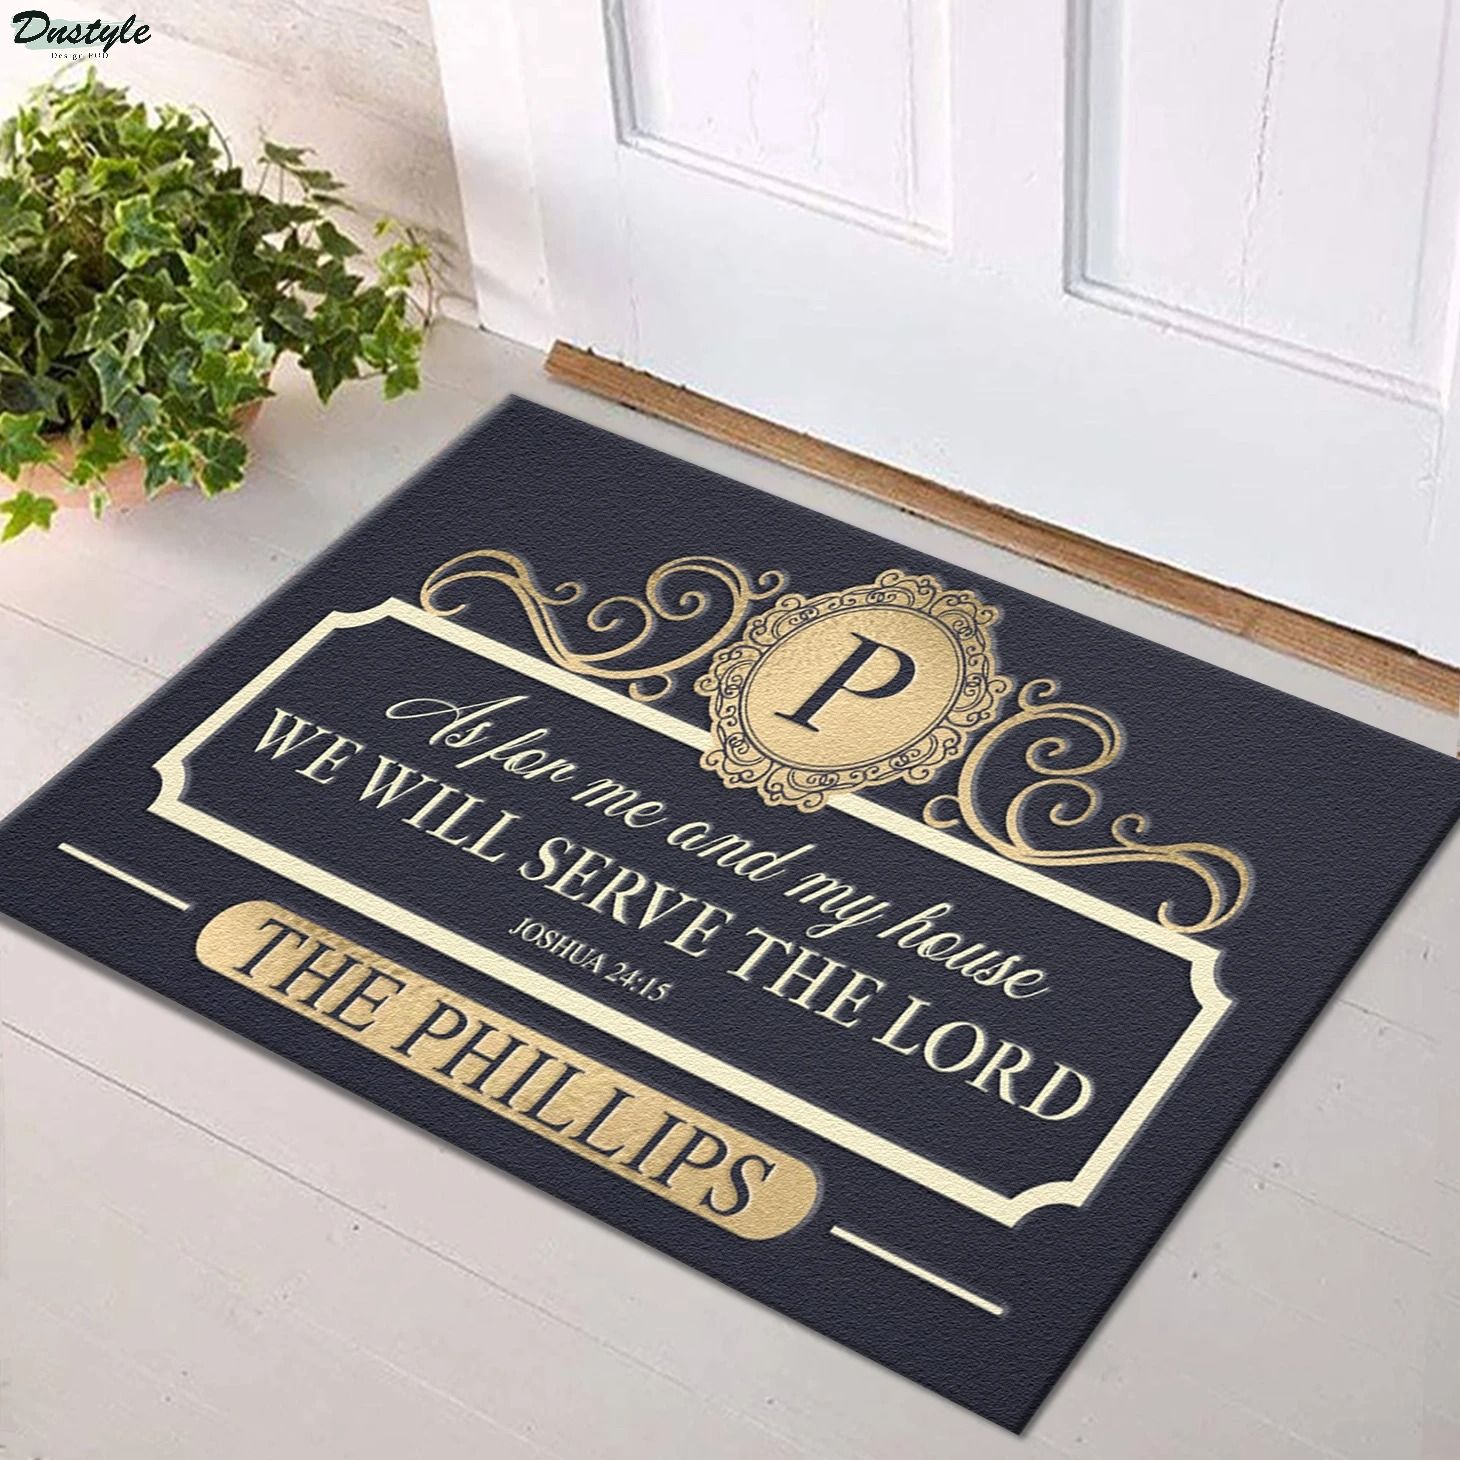 Personalized Home Serve The Lord As for me and my house joshua 24 15 doormat 1